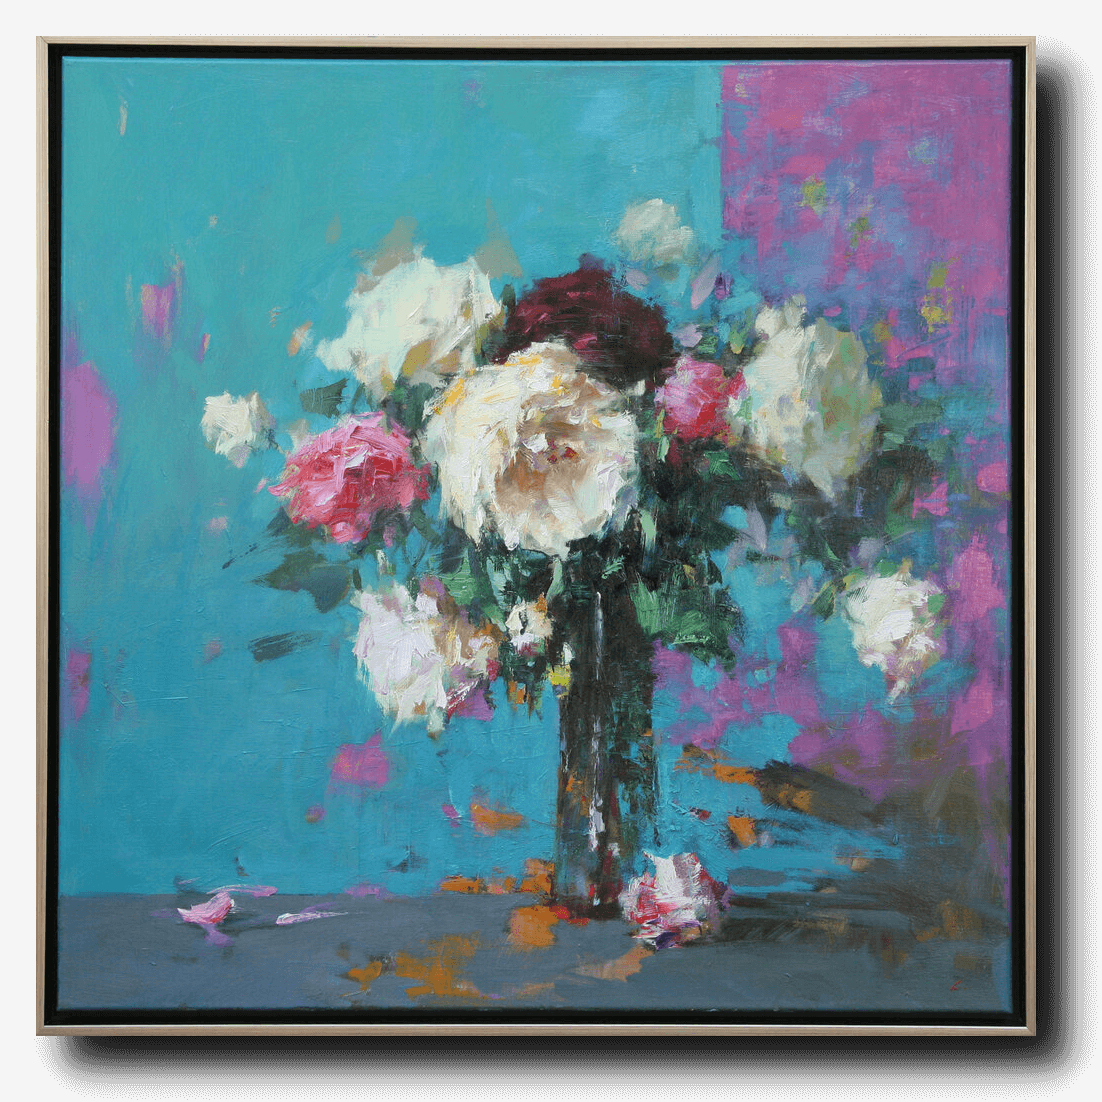 Roses with Blue and Pink Wall by Ning Lee at LePrince Galleries